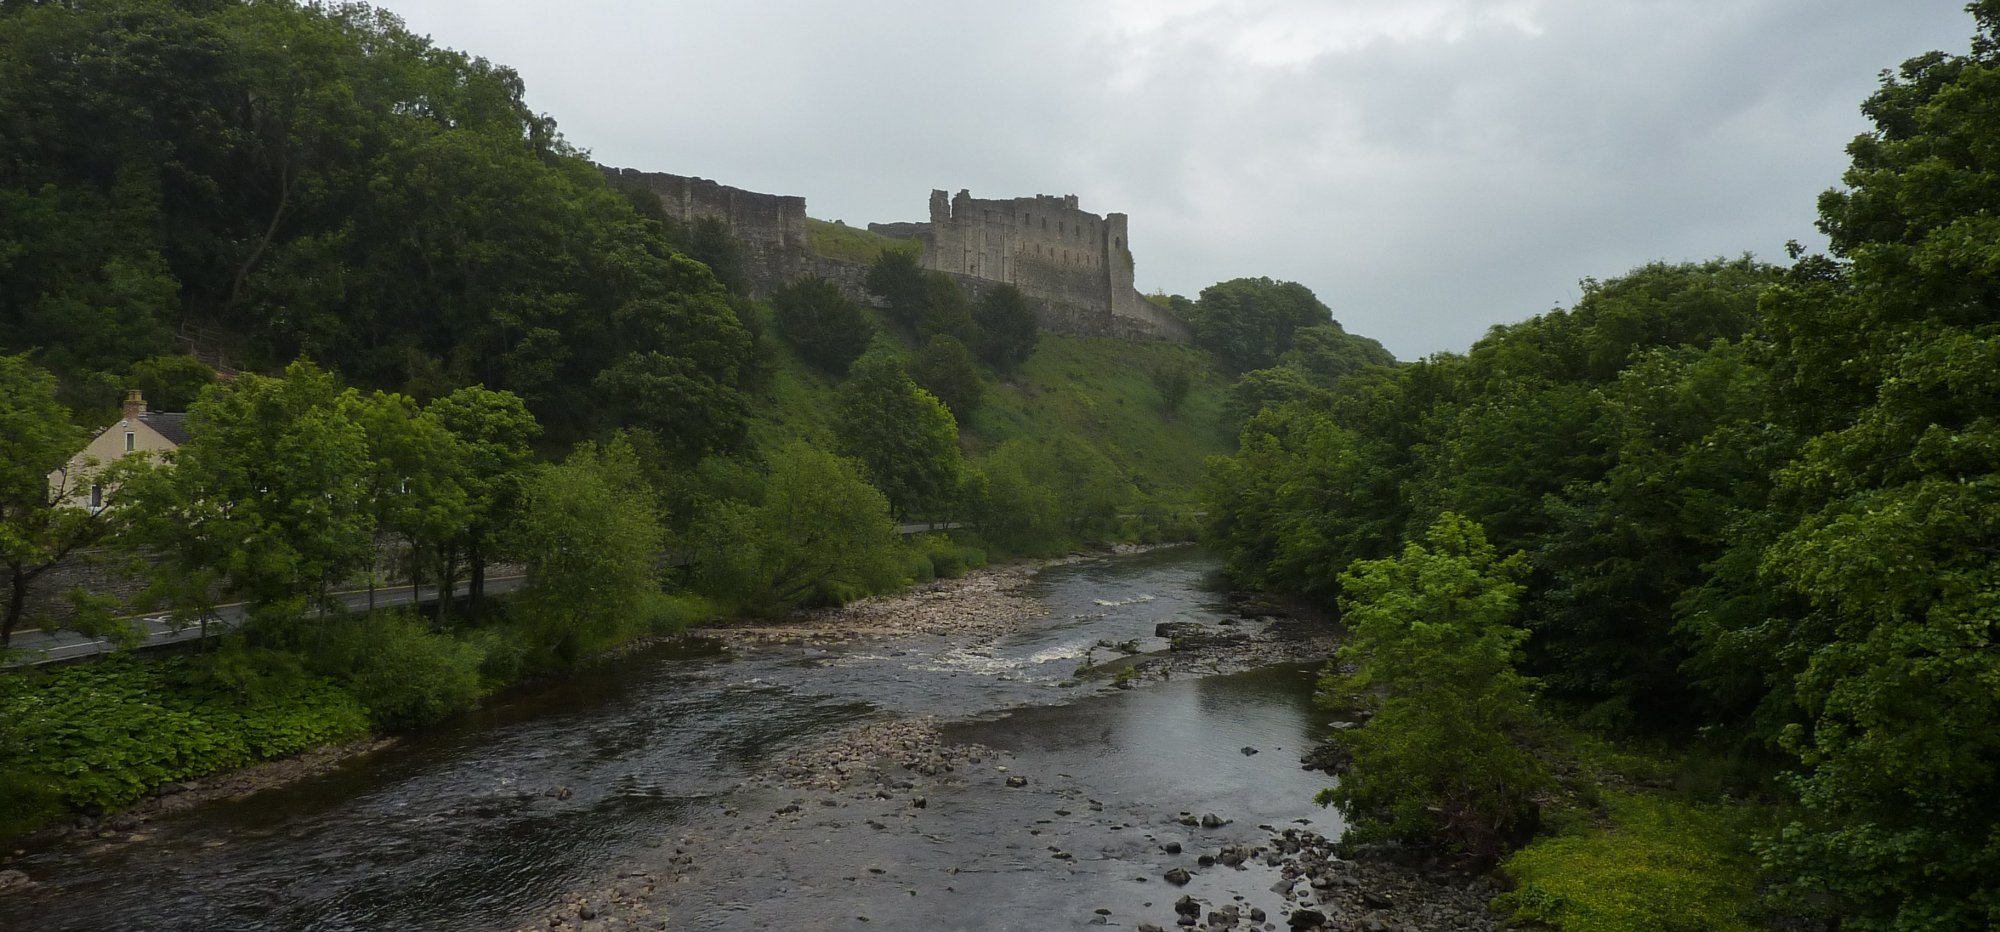 The River Swale and Richmond Castle